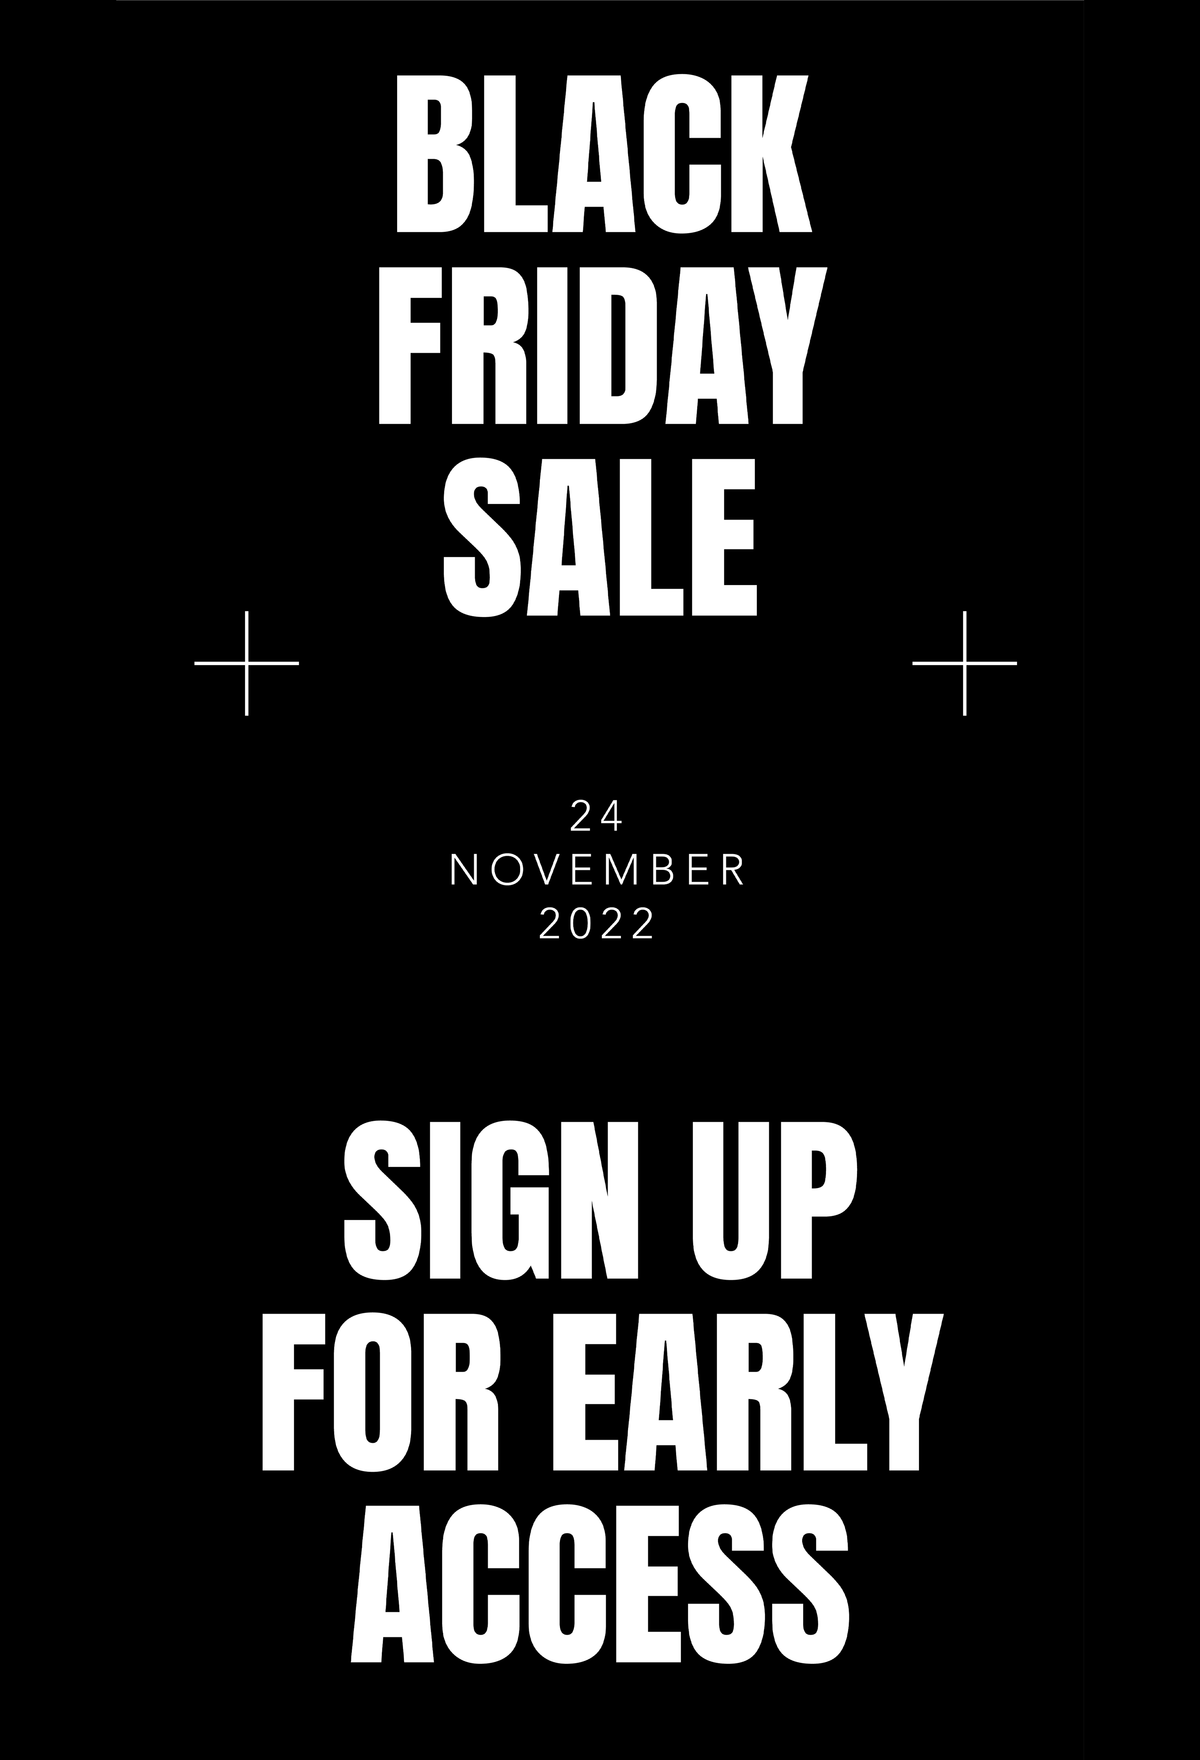 BLACK FRIDAY - ***EARLY ACCESS Black Friday Sale STARTS NOW